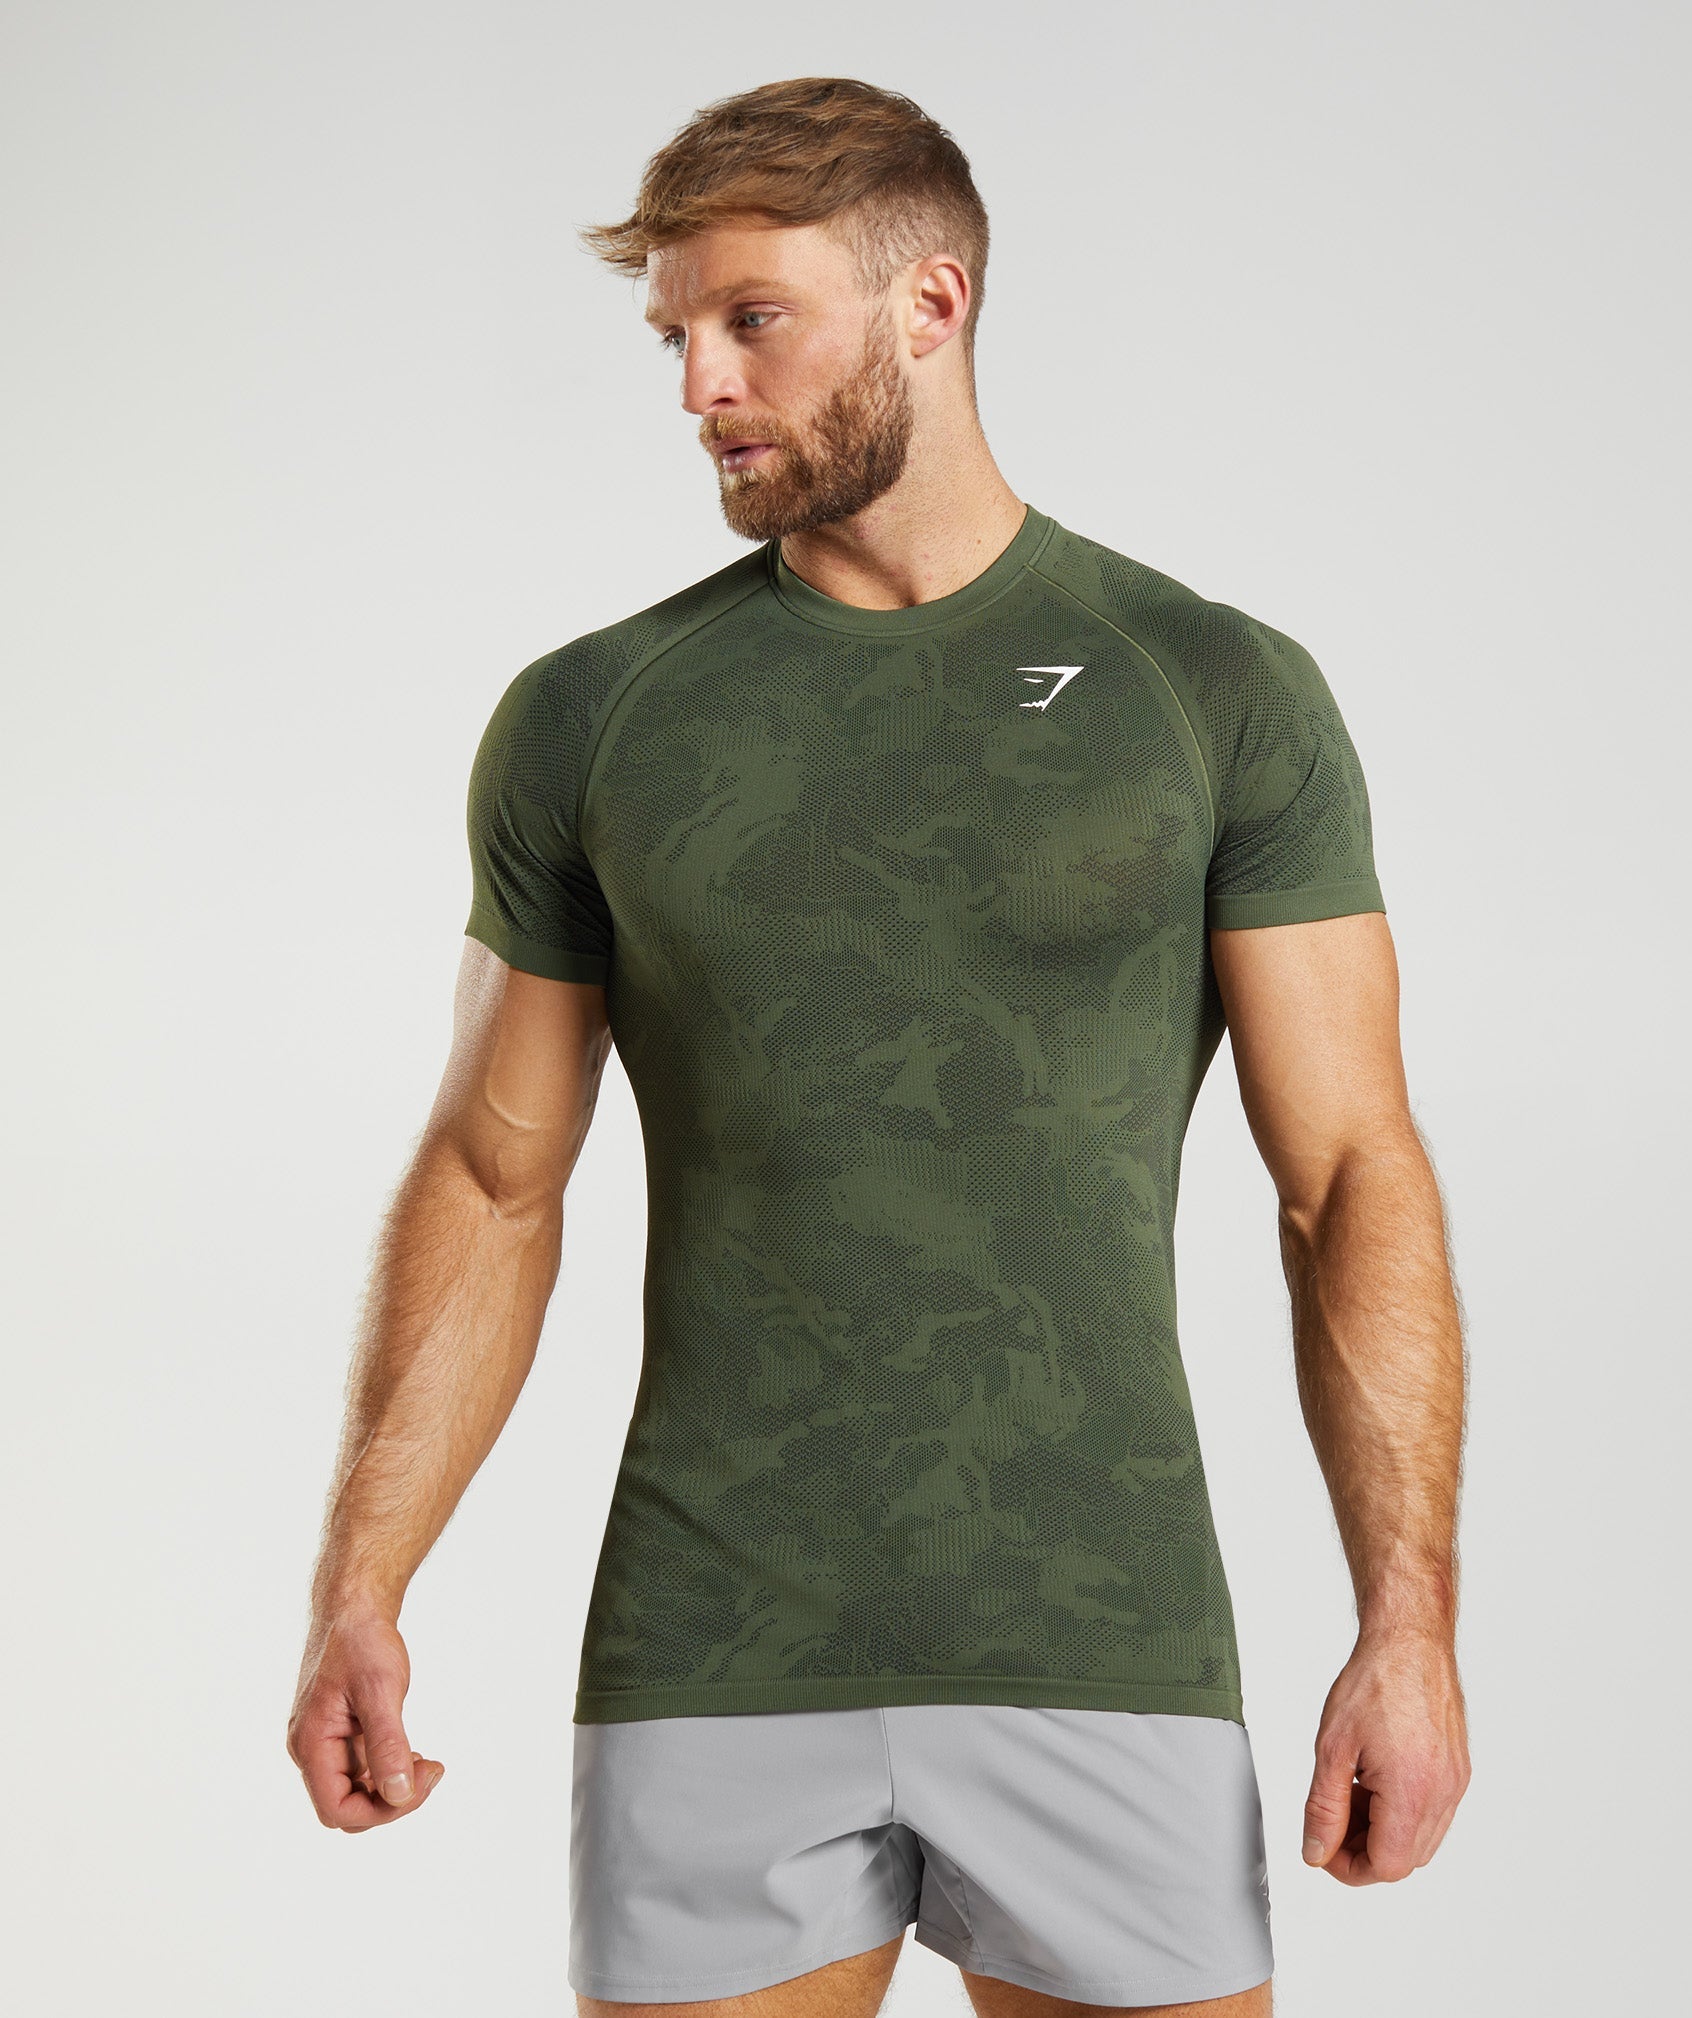 Geo Seamless T-Shirt in Core Olive/Black - view 1